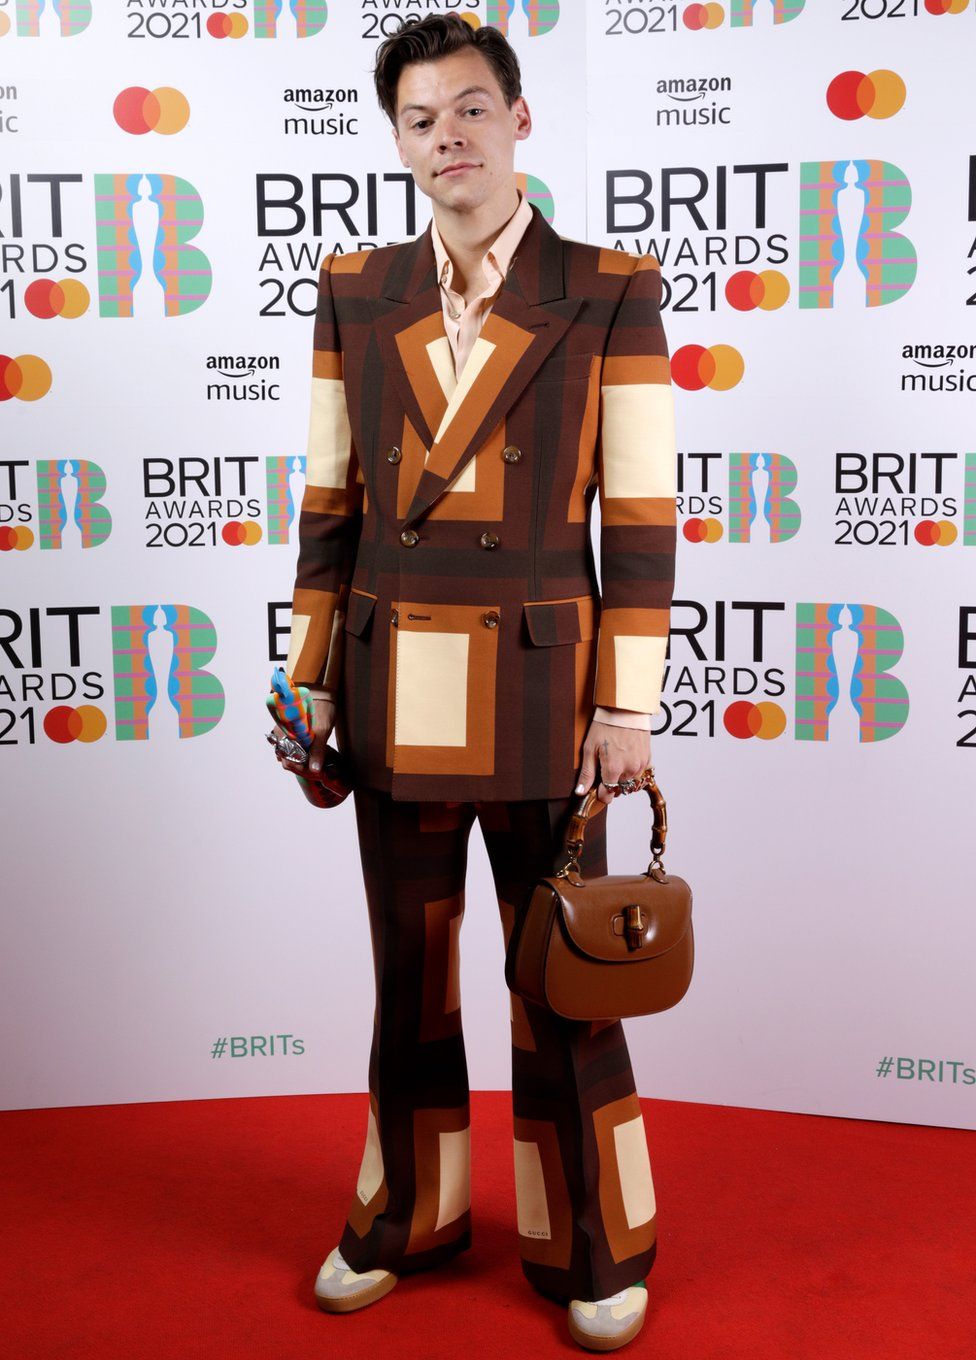 Brit Awards 2021: The best outfits from the red carpet and ceremony - BBC  News